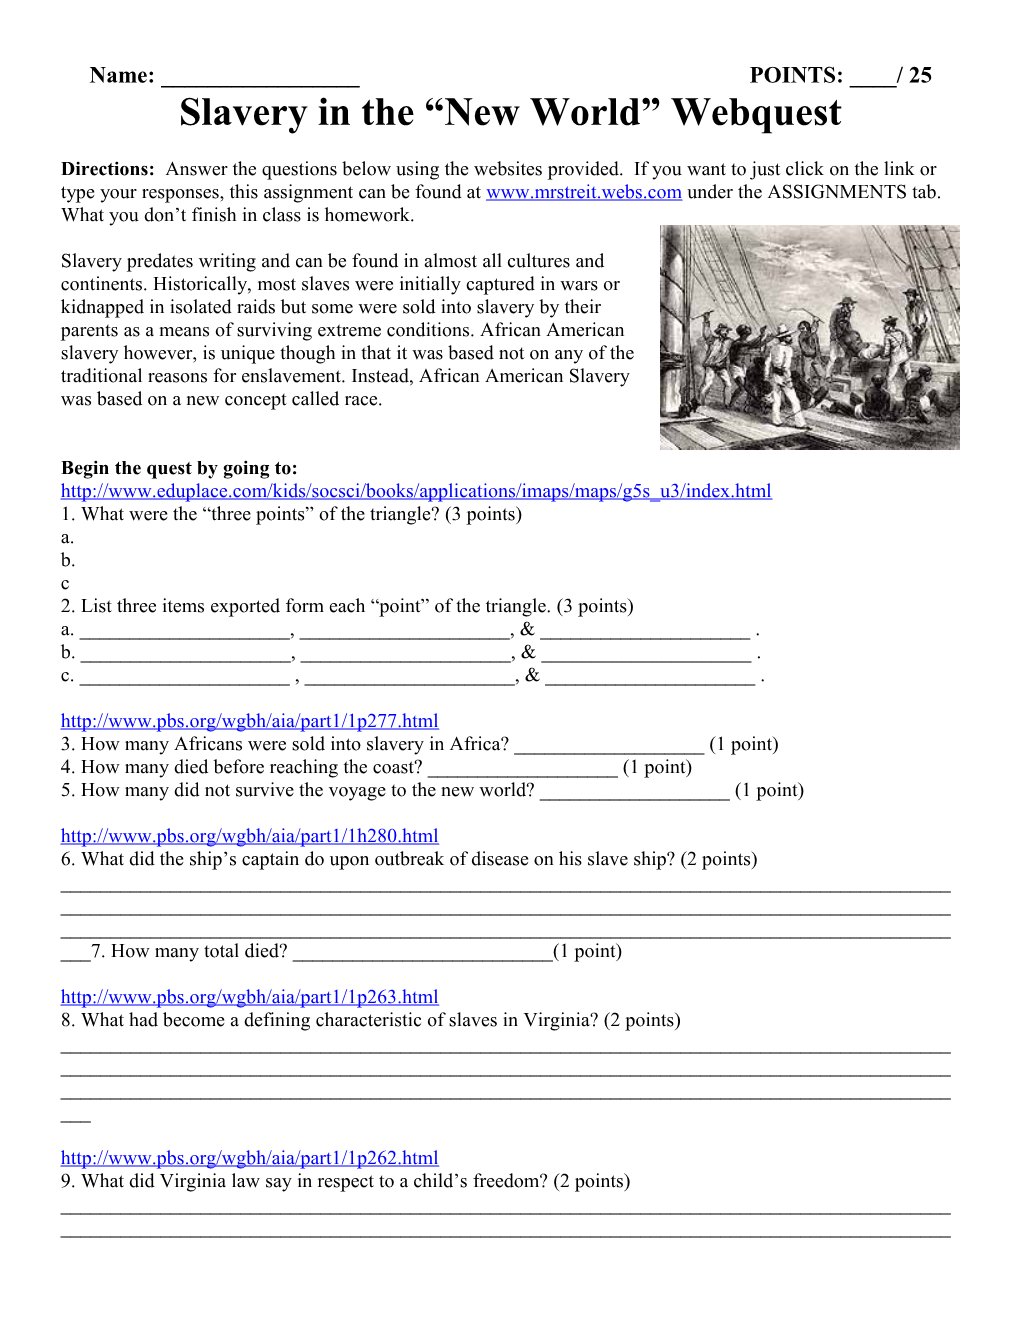 Slavery in the New World Webquest